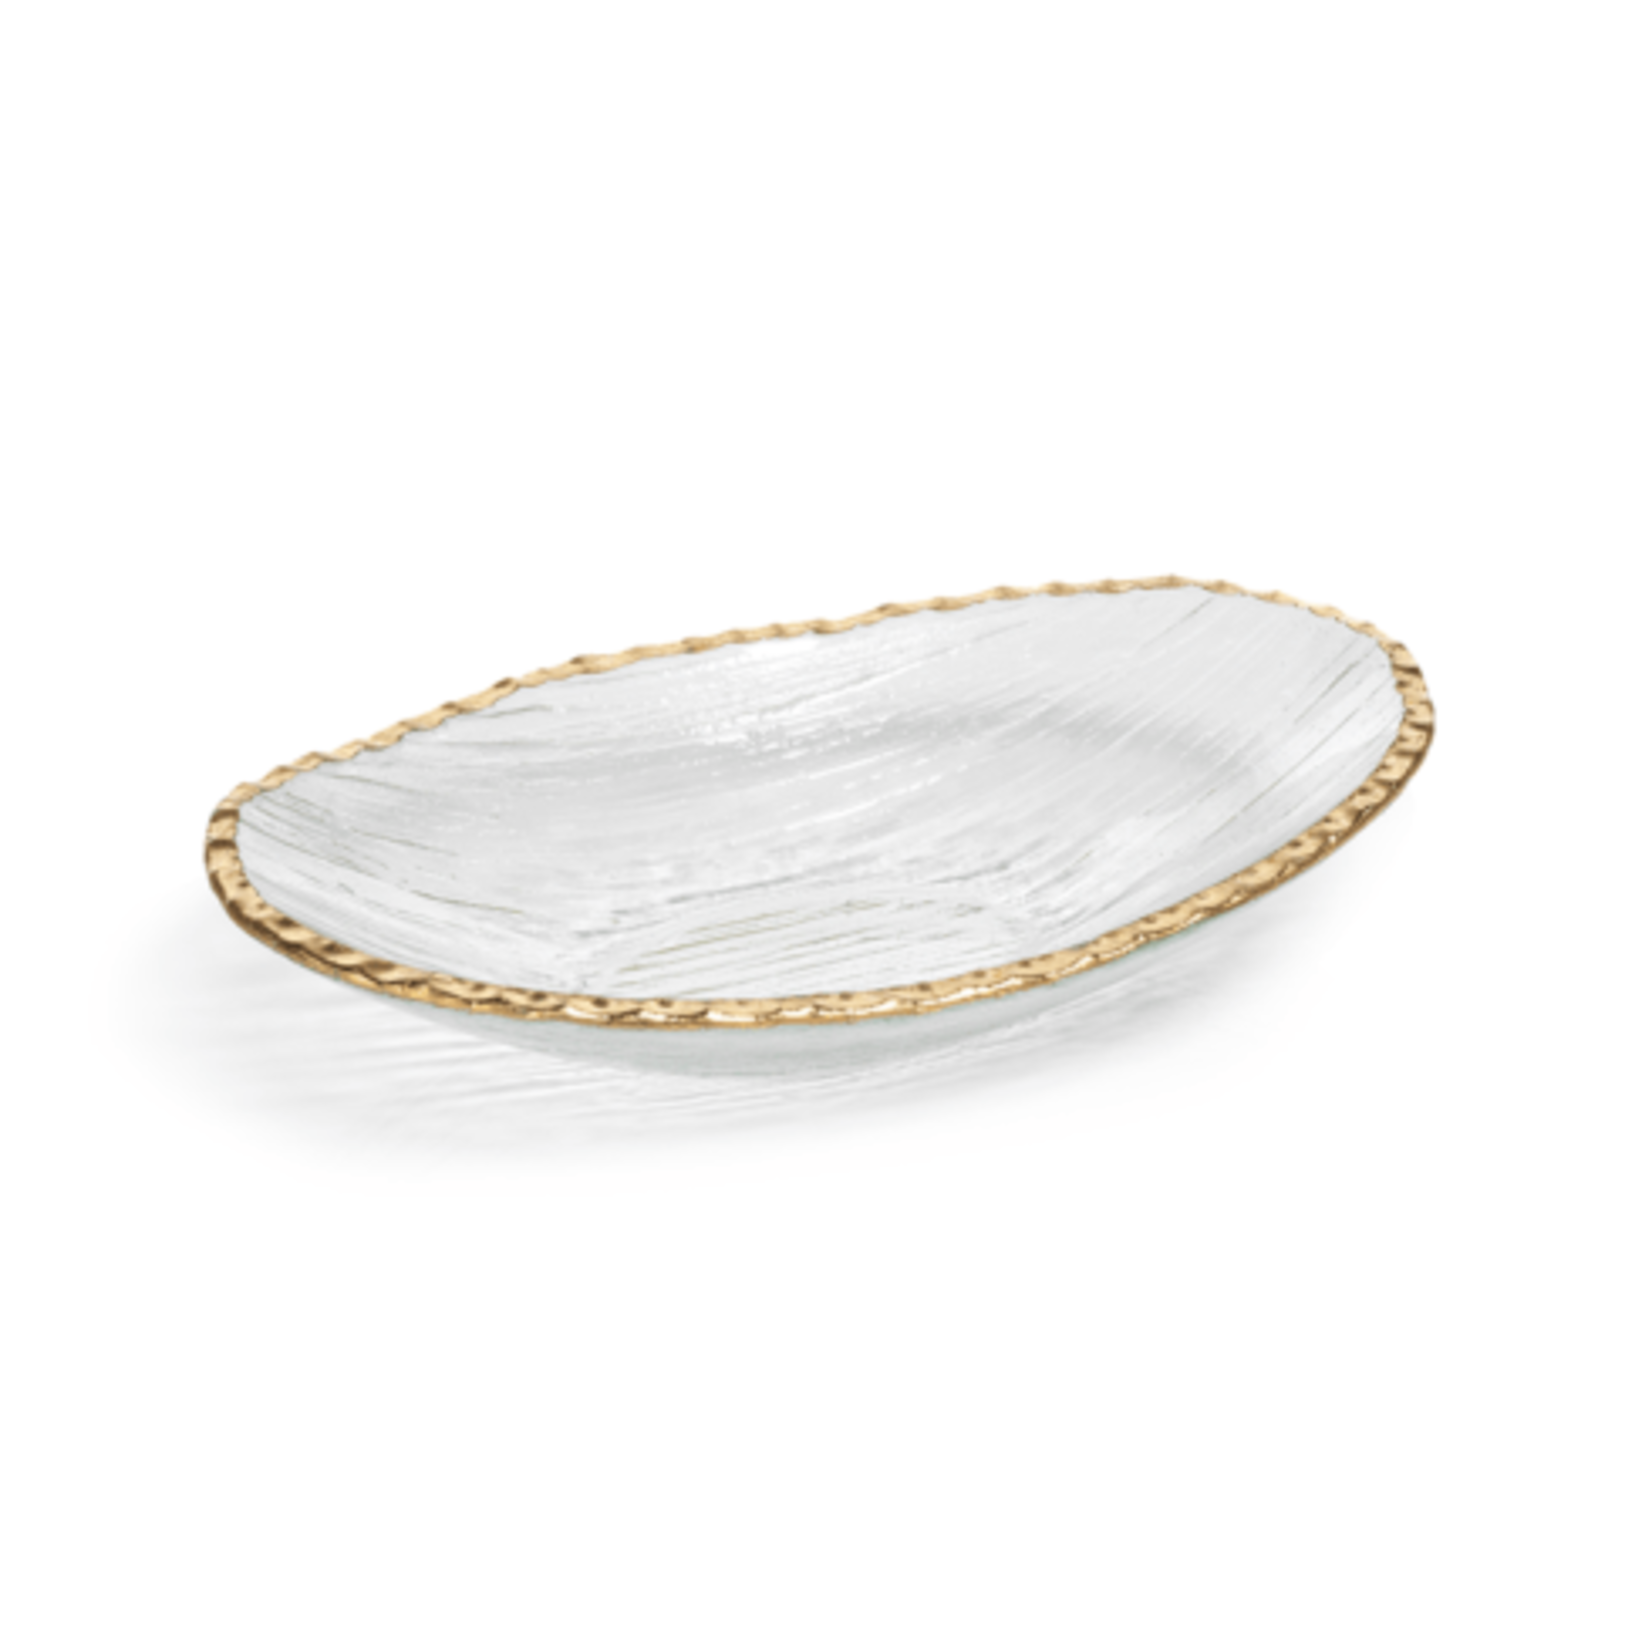 CLEAR TEXTURED BOWL GOLD TRIM